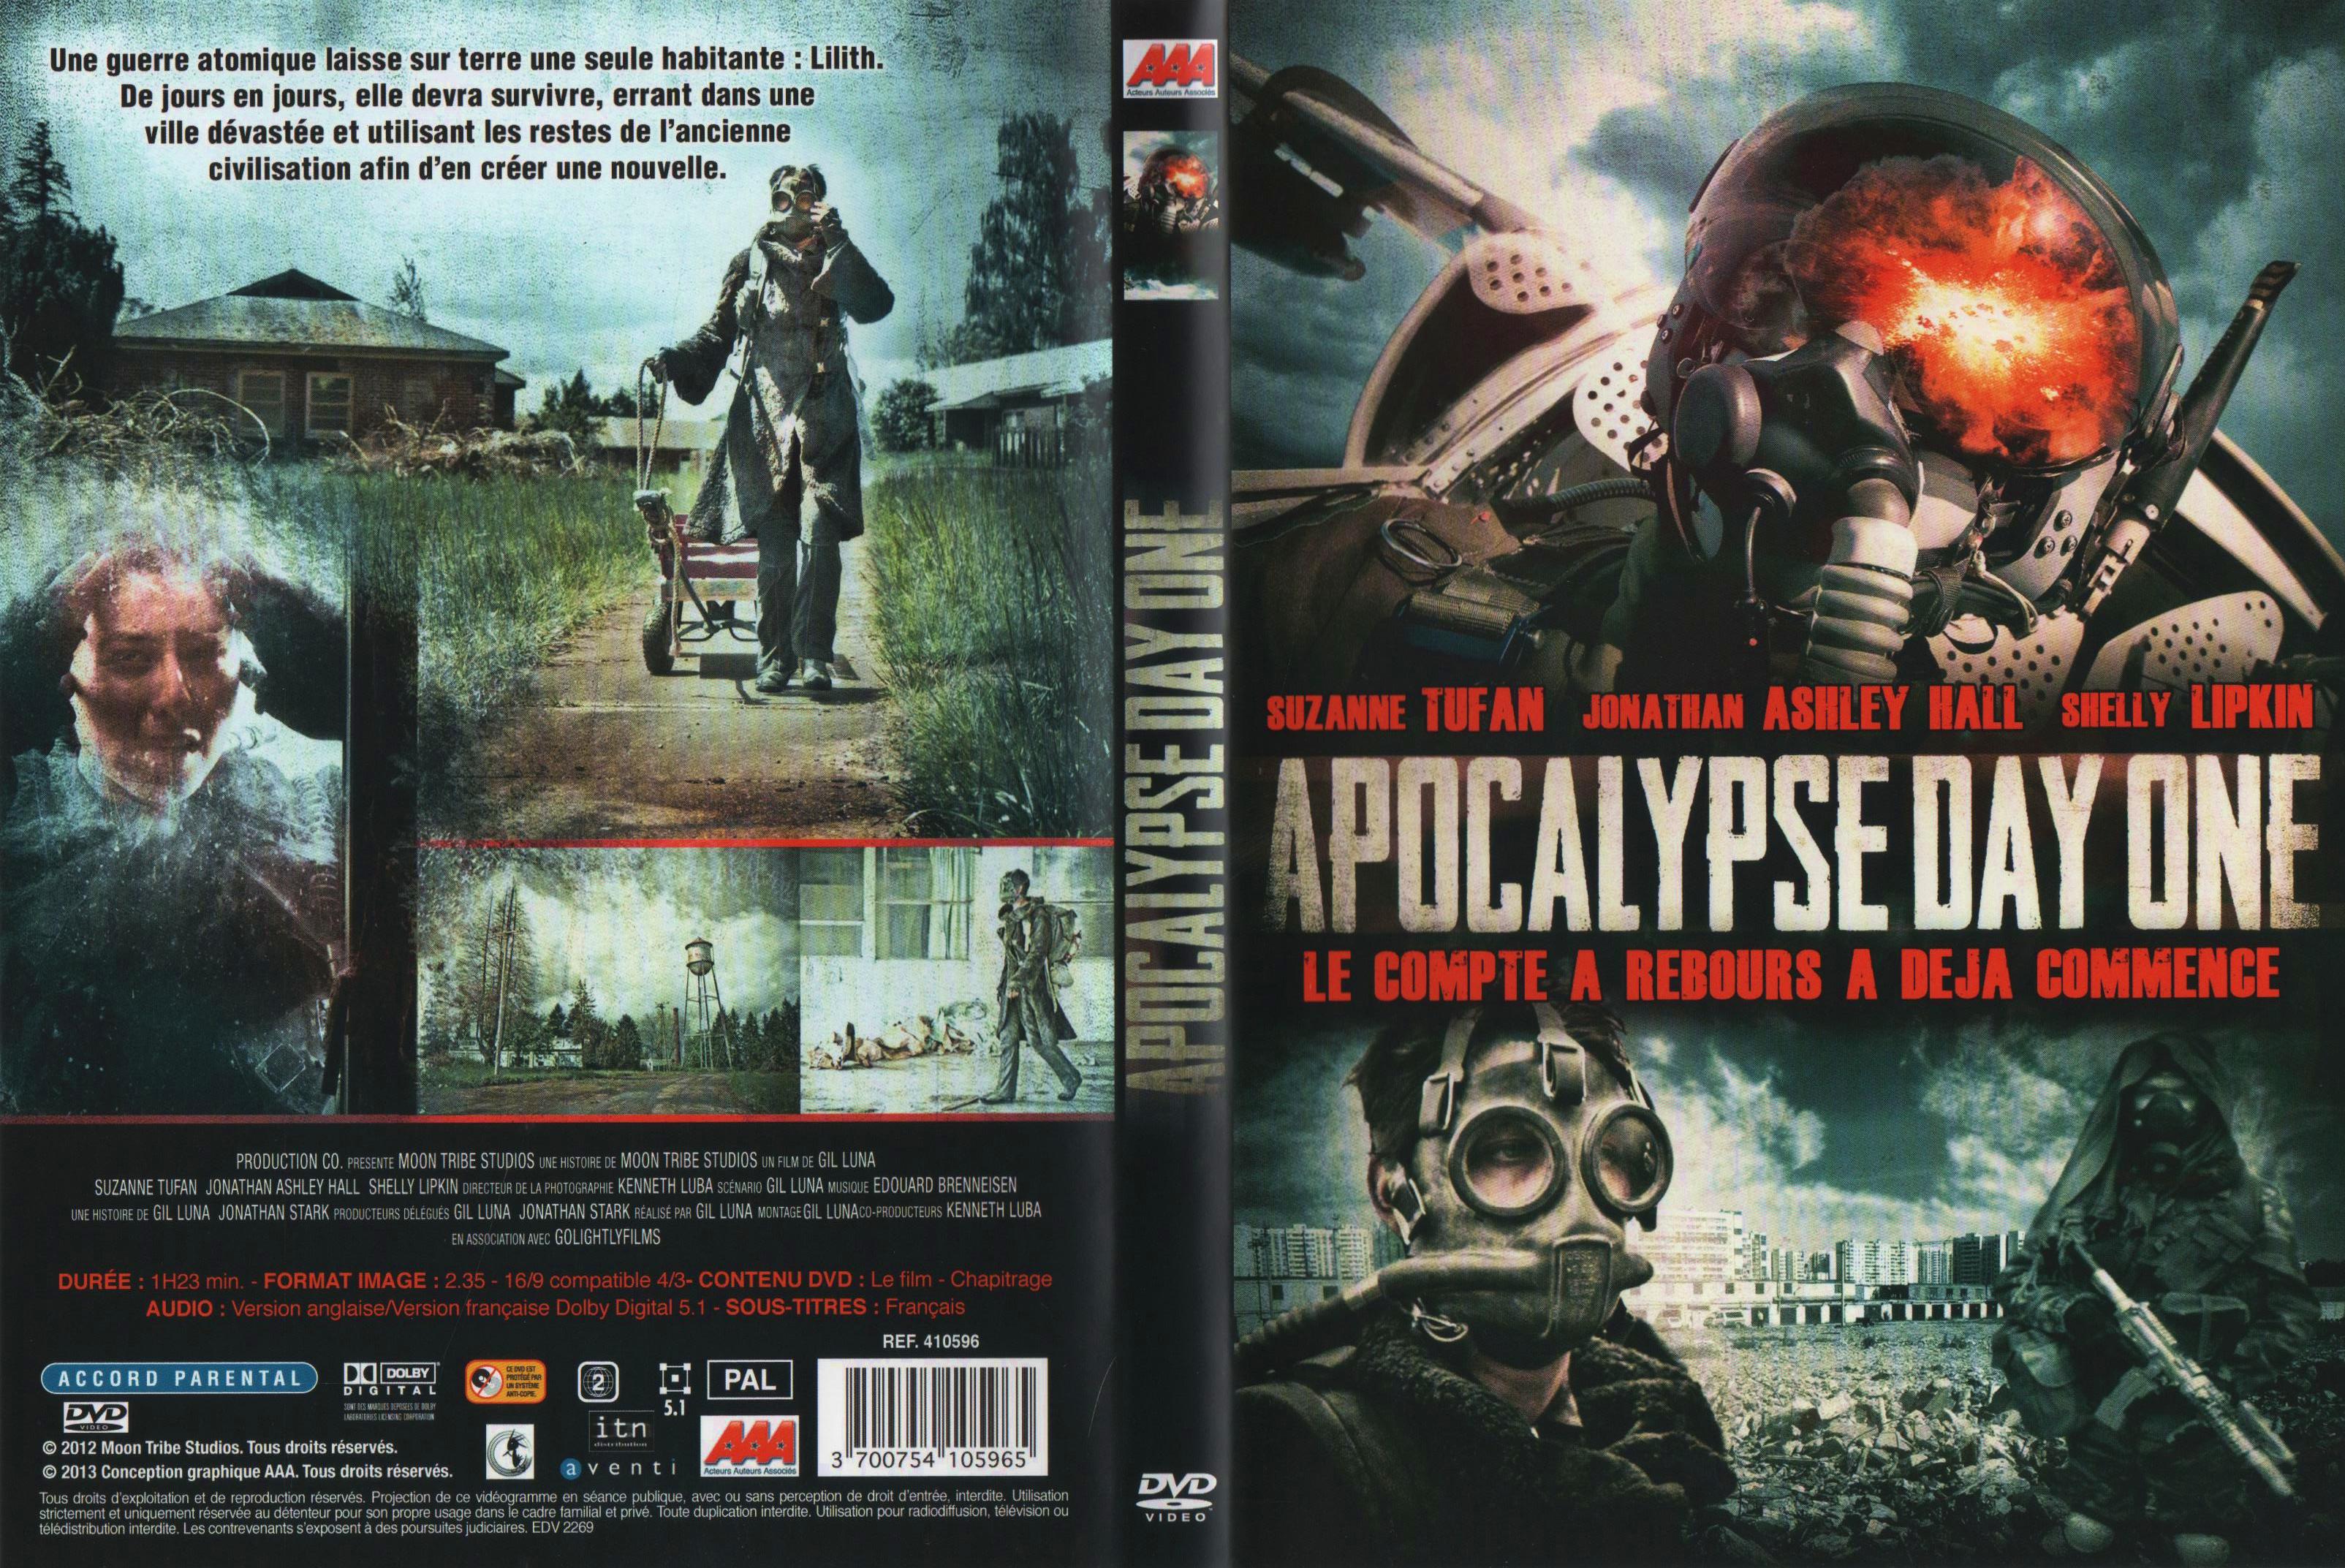 Jaquette DVD Apocalypse day one